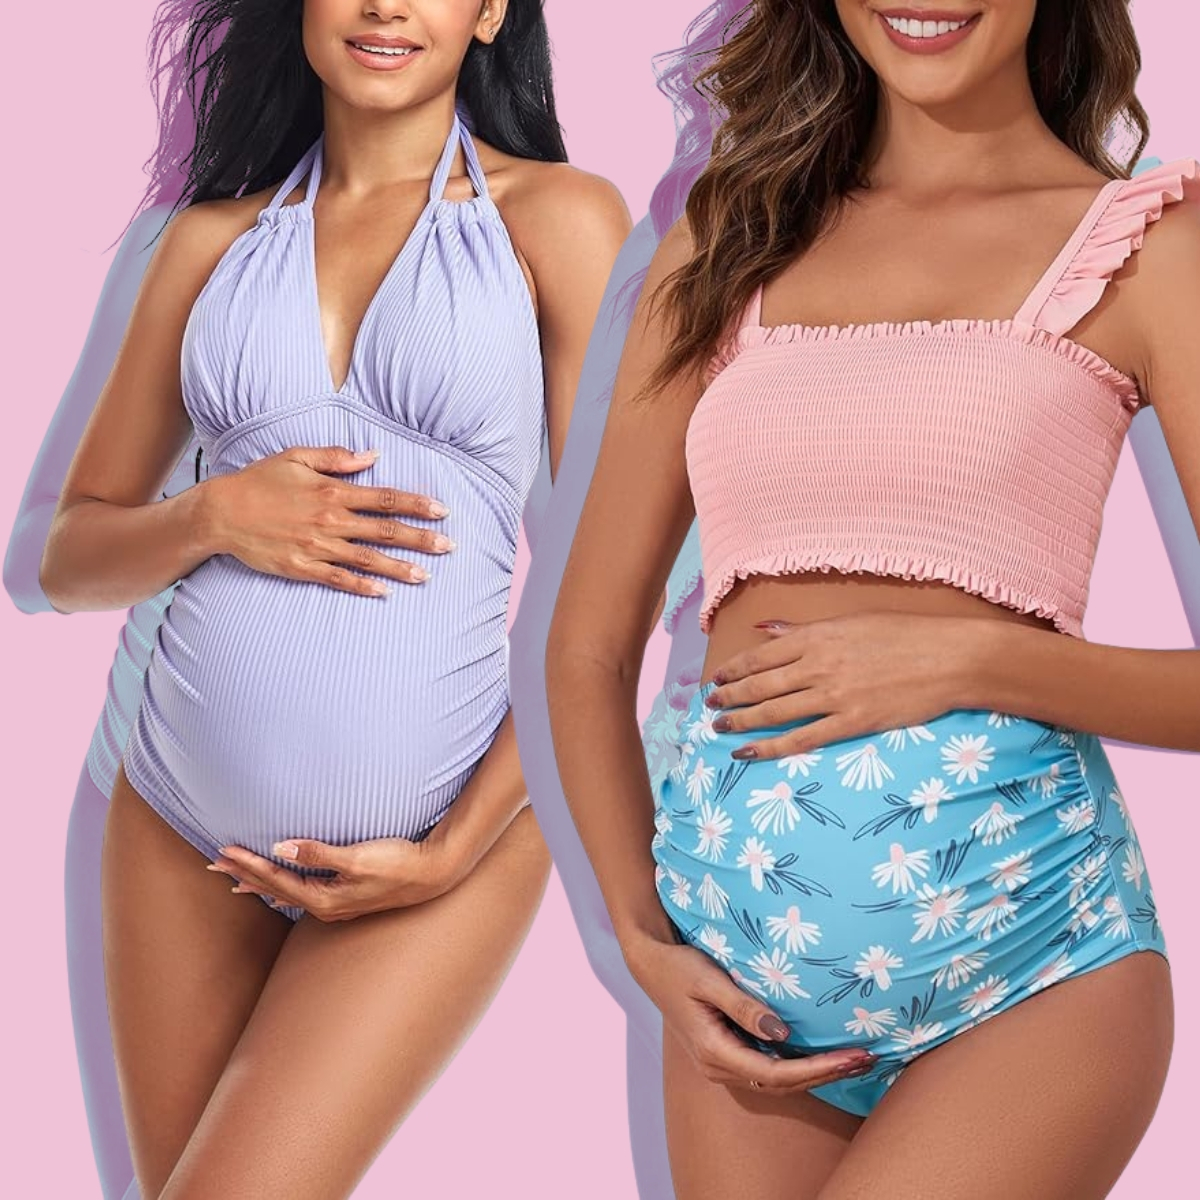 https://akns-images.eonline.com/eol_images/Entire_Site/2024221/rs_1200x1200-240321184014-Shop_Best_Maternity_Swimsuits_1200x1200.jpg?fit=around%7C1200:1200&output-quality=90&crop=1200:1200;center,top